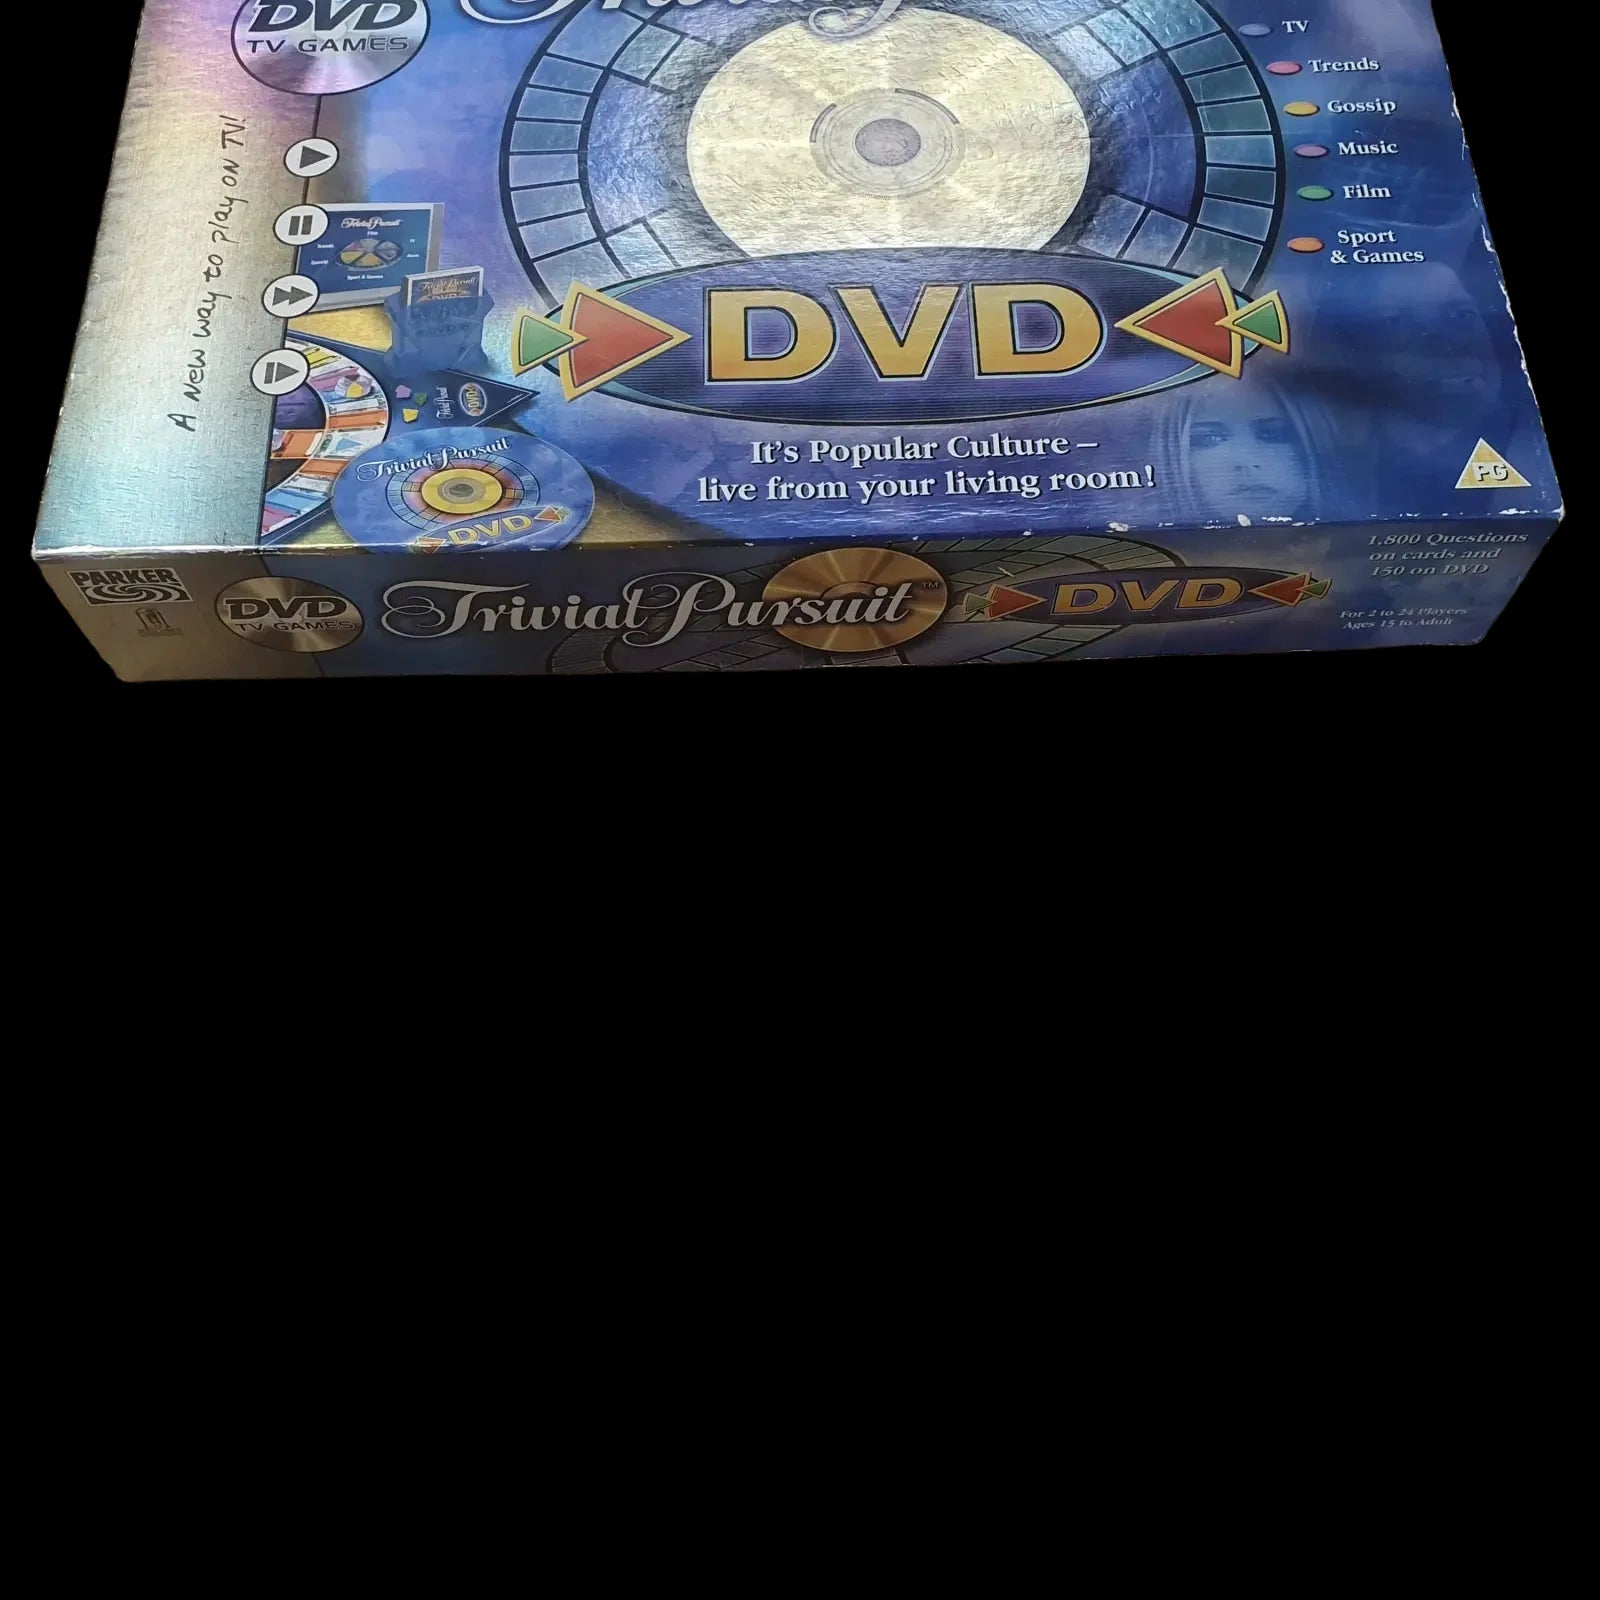 Trivial Pursuit Dvd Boxed Board Game 2004 - Games - Parker